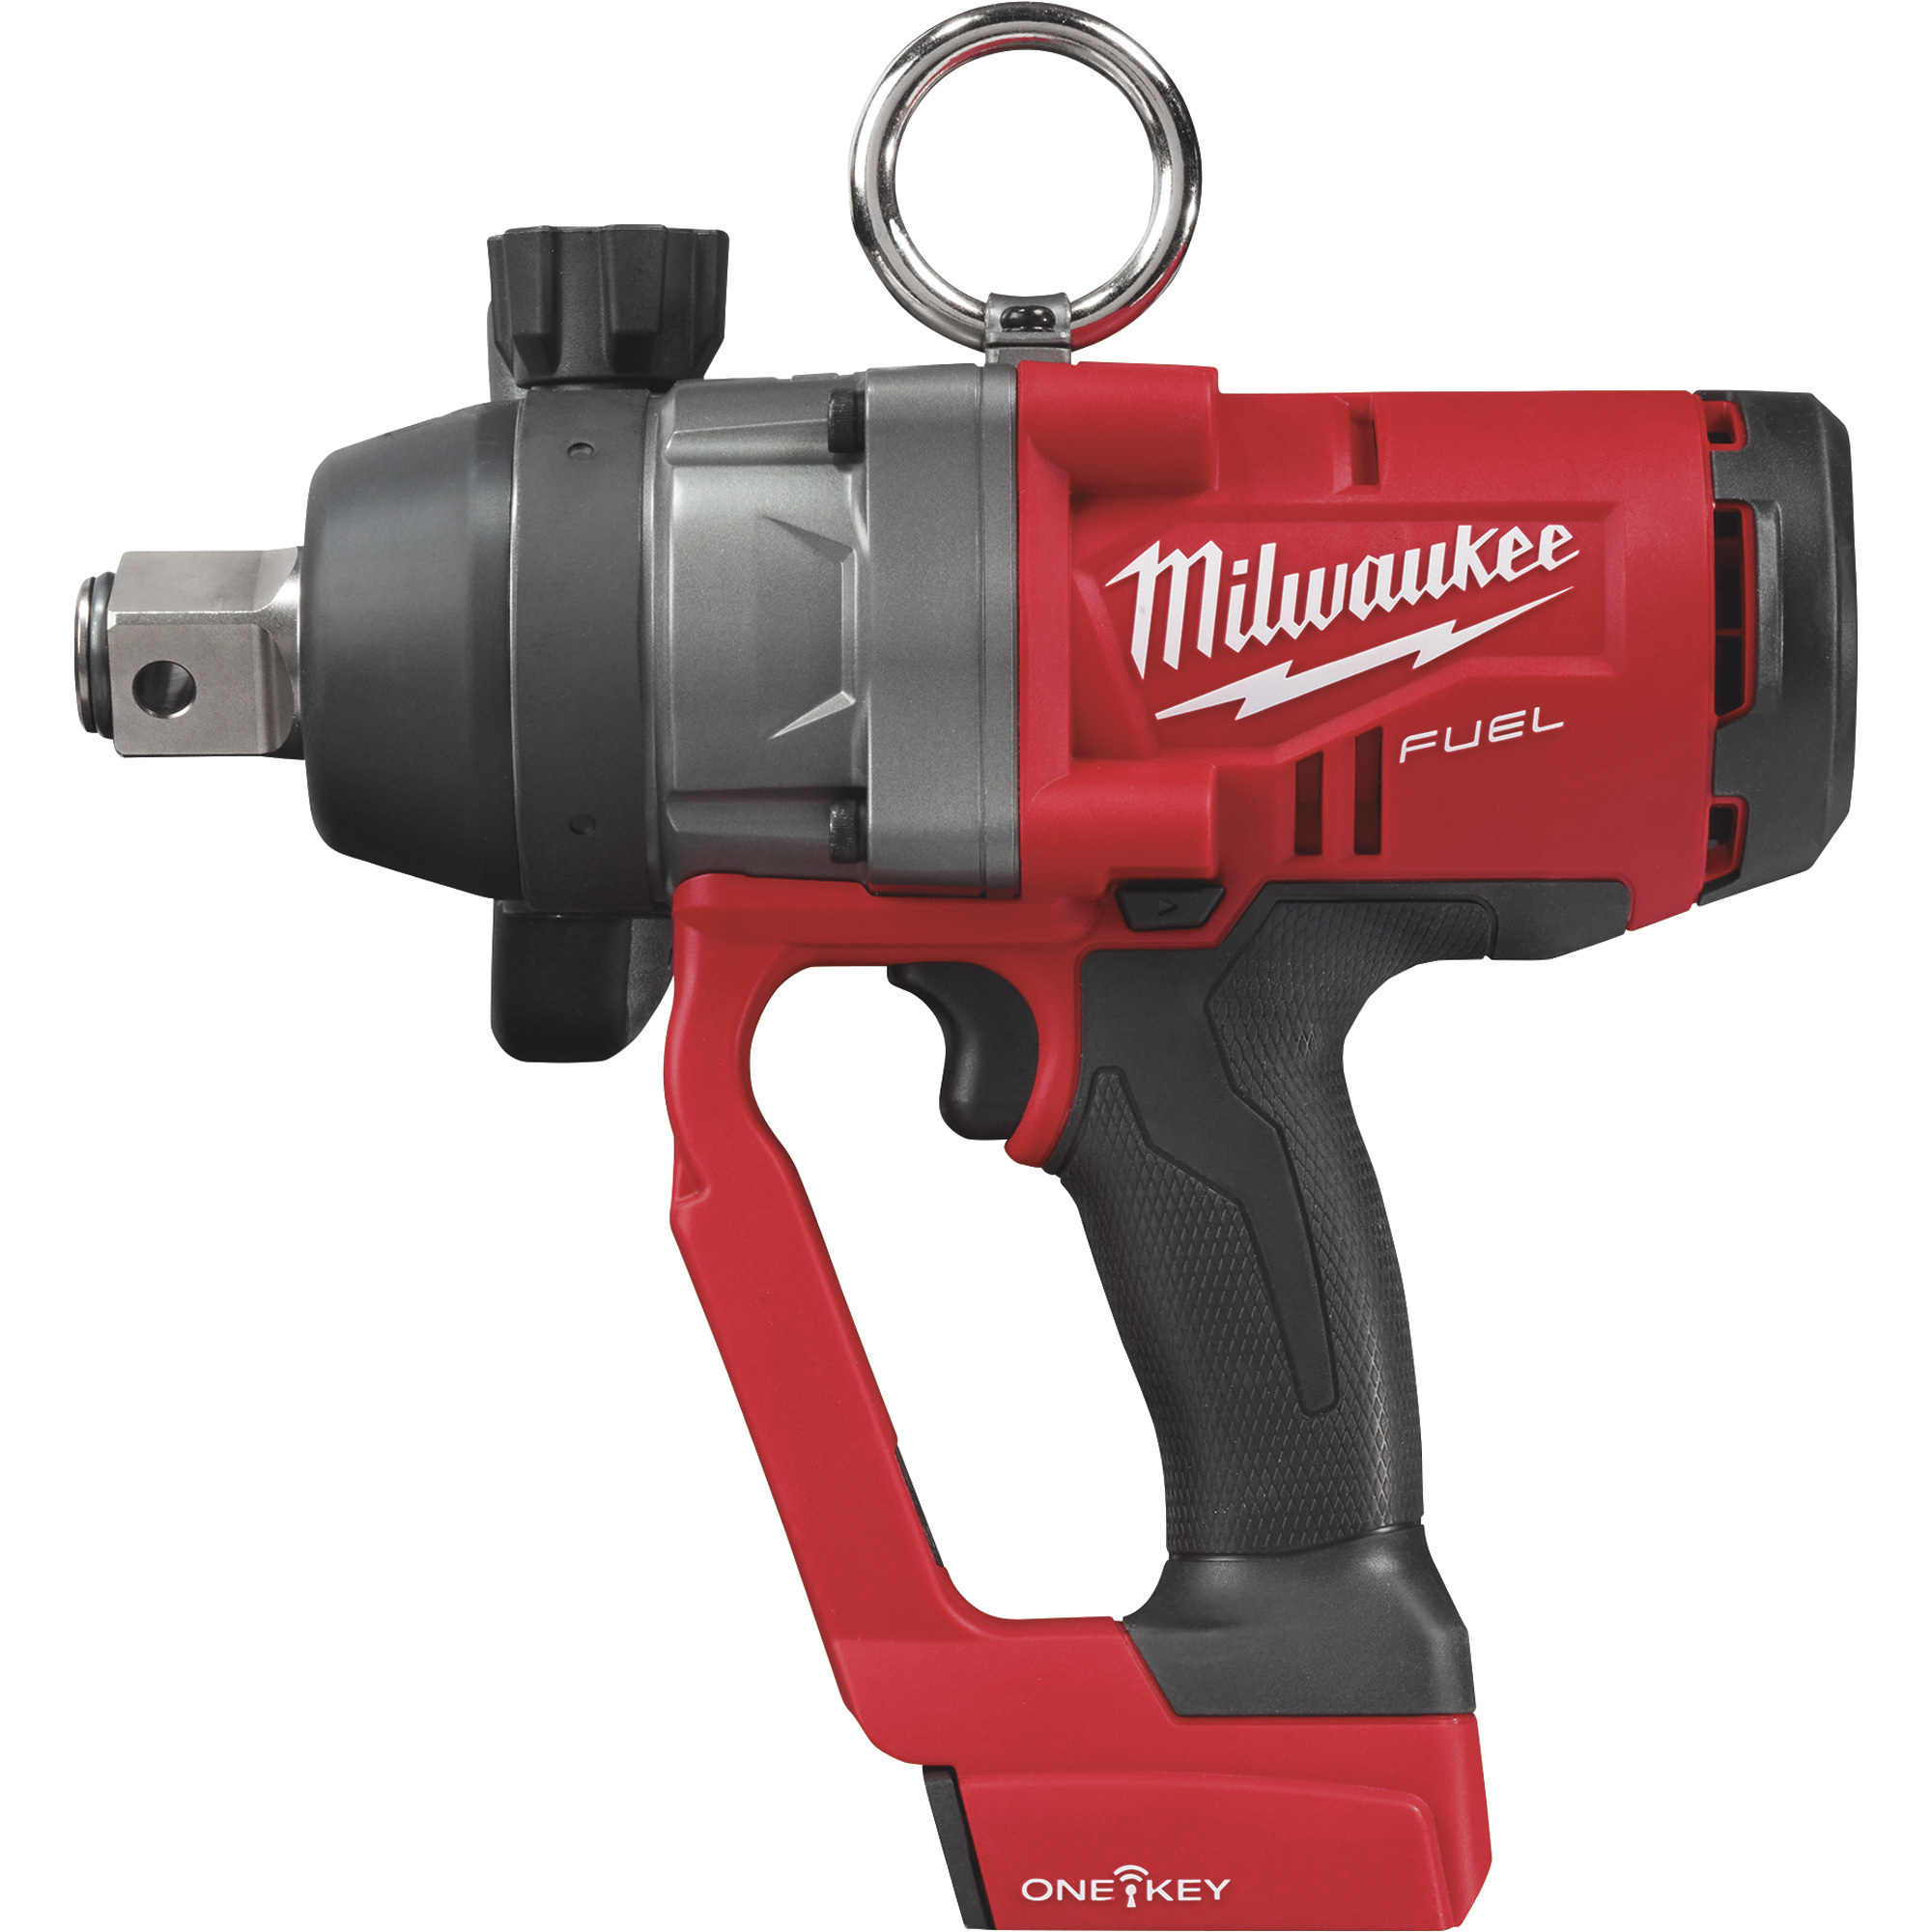 Milwaukee M18 FUEL Cordless High-Torque Impact Wrench with One-Key, Tool Only, 1Inch Drive, 1800 Ft./Lbs. Torque, Model 2867-20